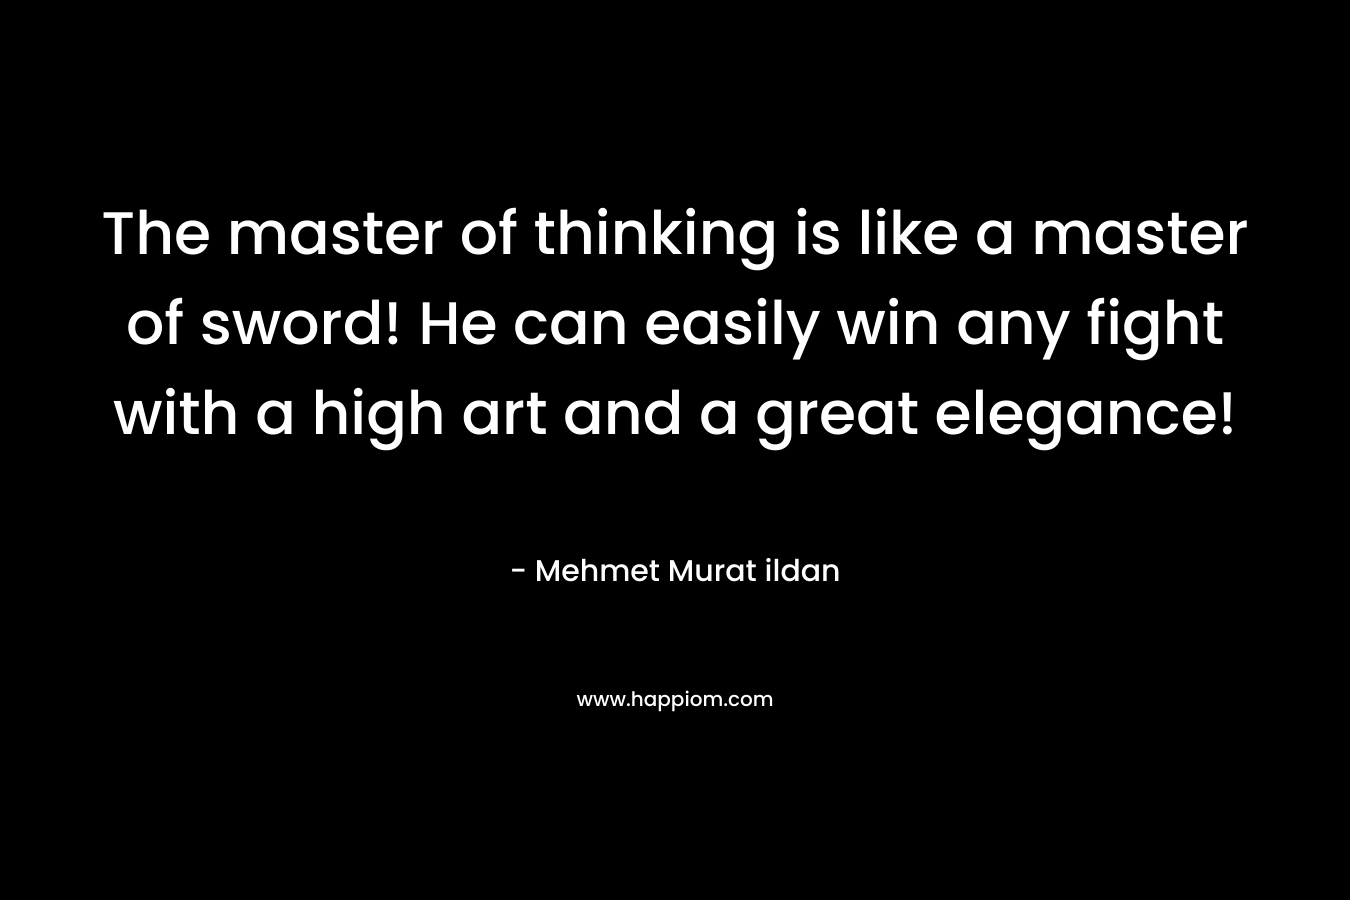 The master of thinking is like a master of sword! He can easily win any fight with a high art and a great elegance!